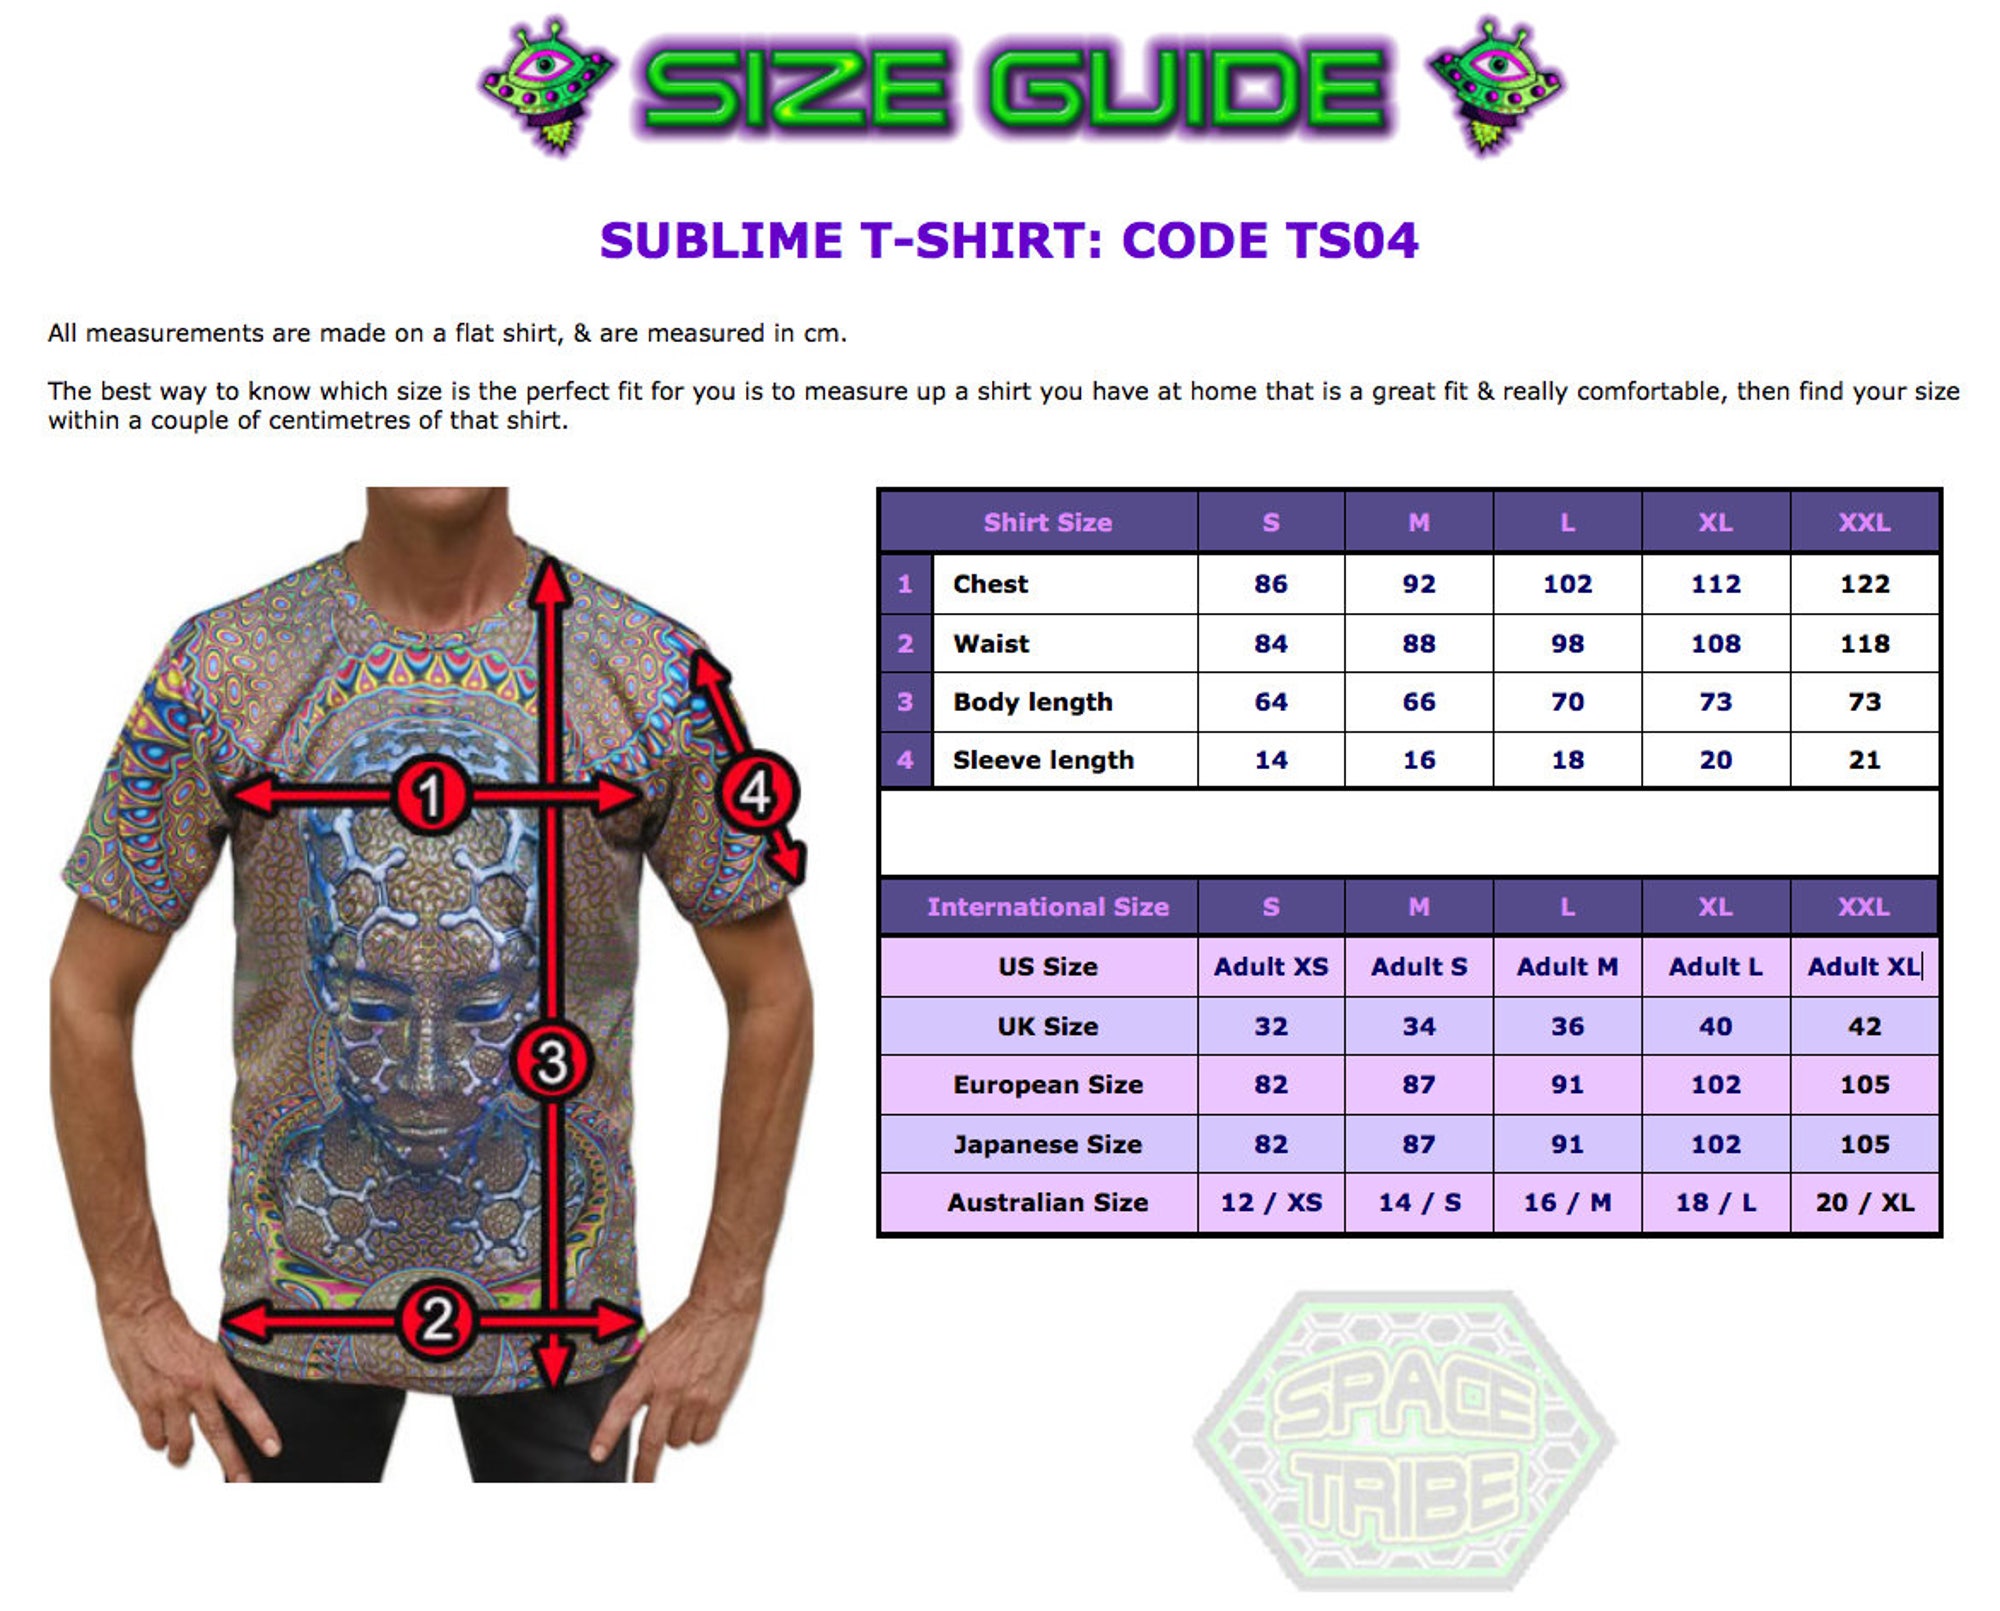 Psychedelic Ancestral Ornament UV Trippy T Shirt 3D